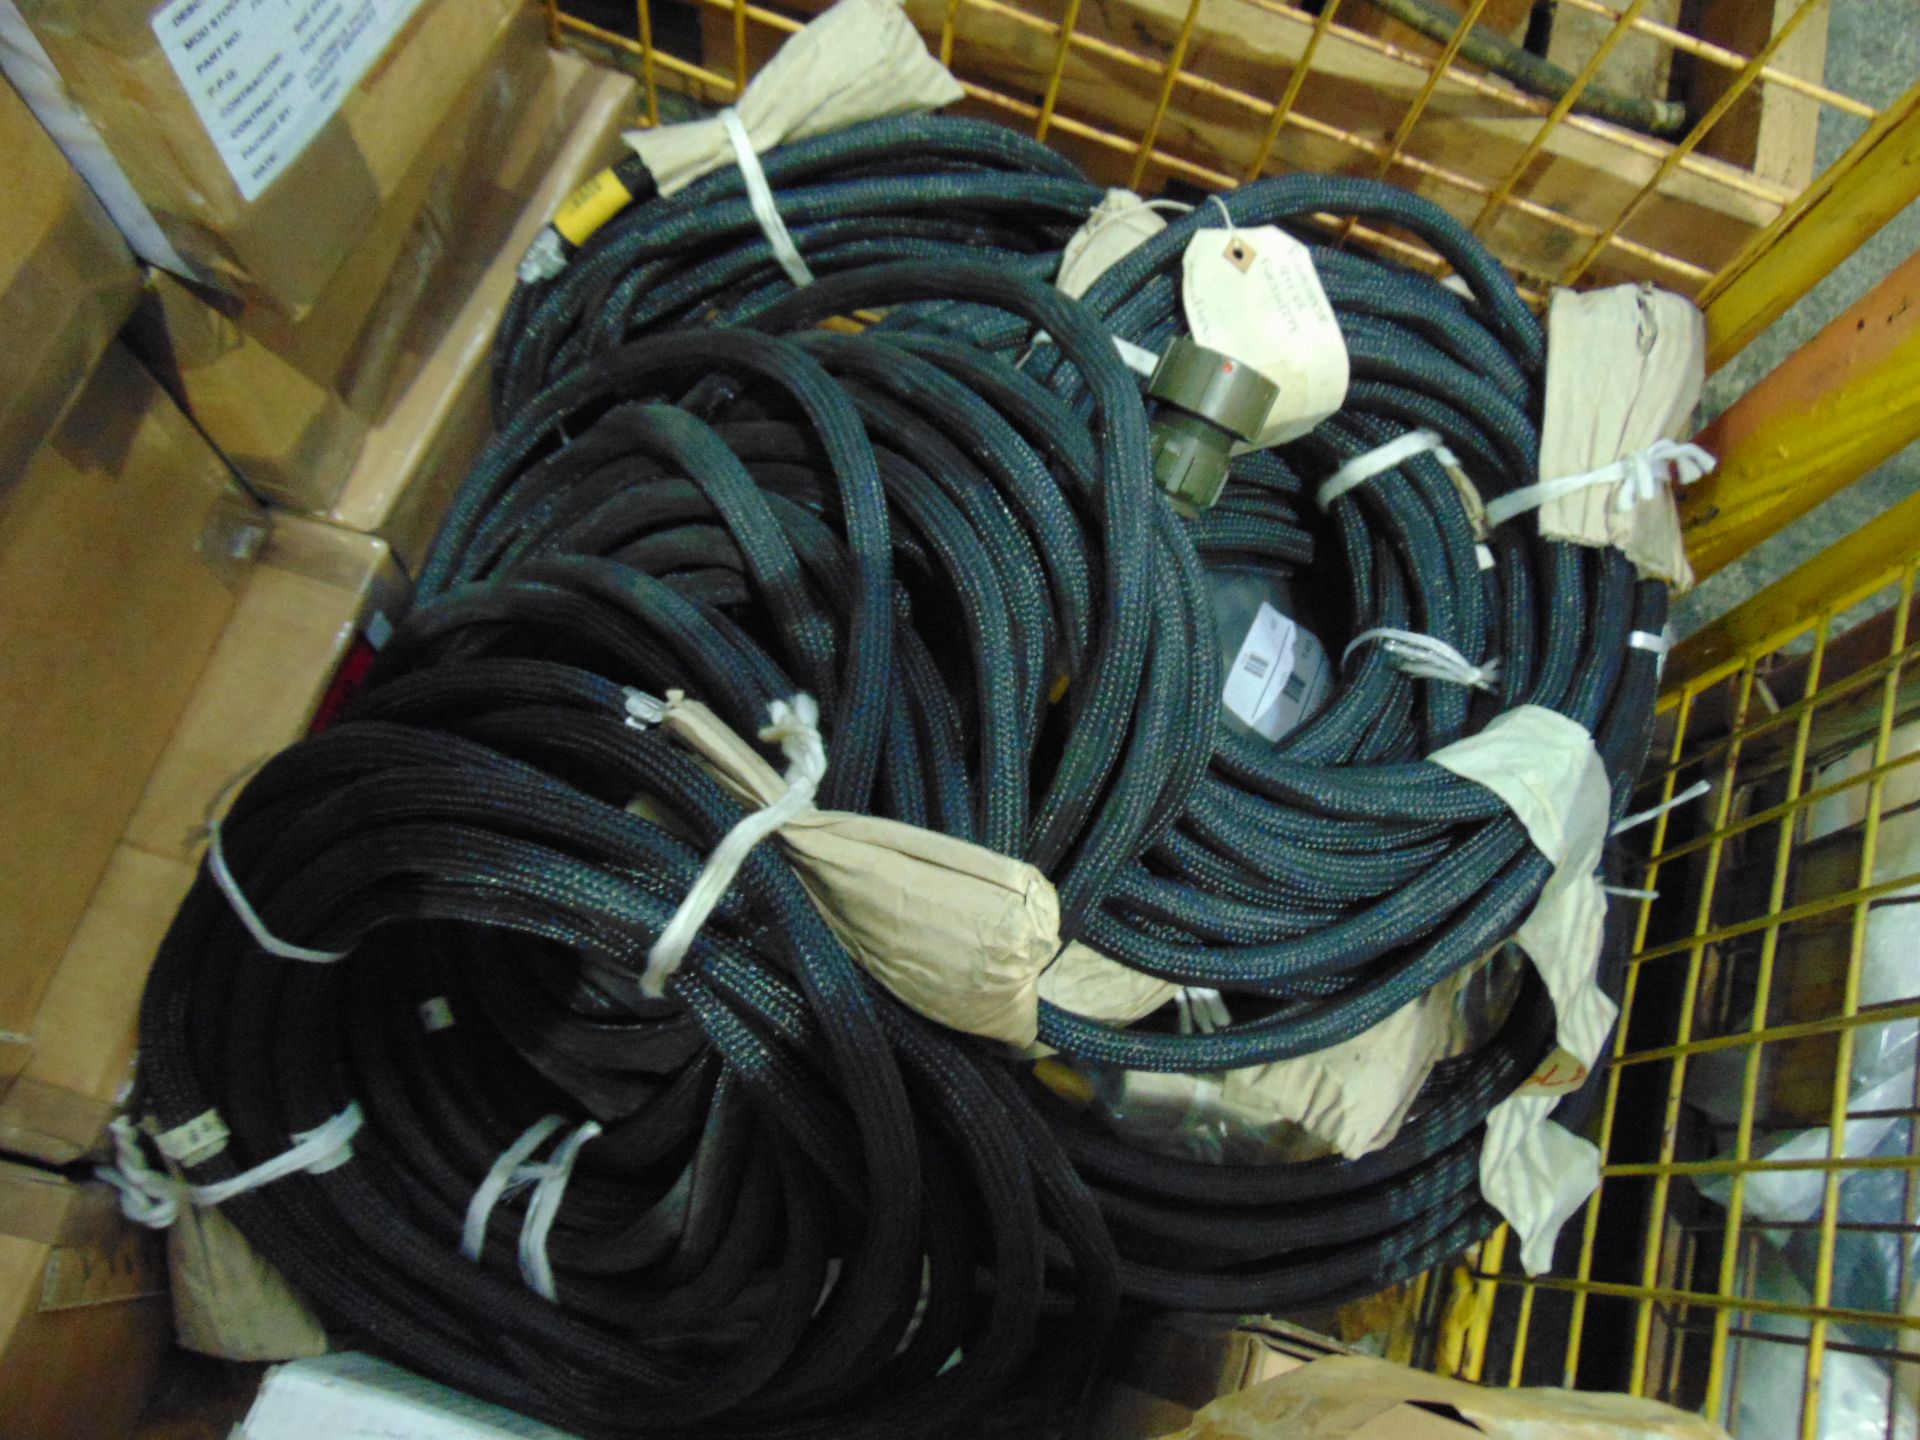 Mixed Stillage consisting of Fan Assys, Wiring Harnesses, Air Dryer Cartridges etc - Image 7 of 11